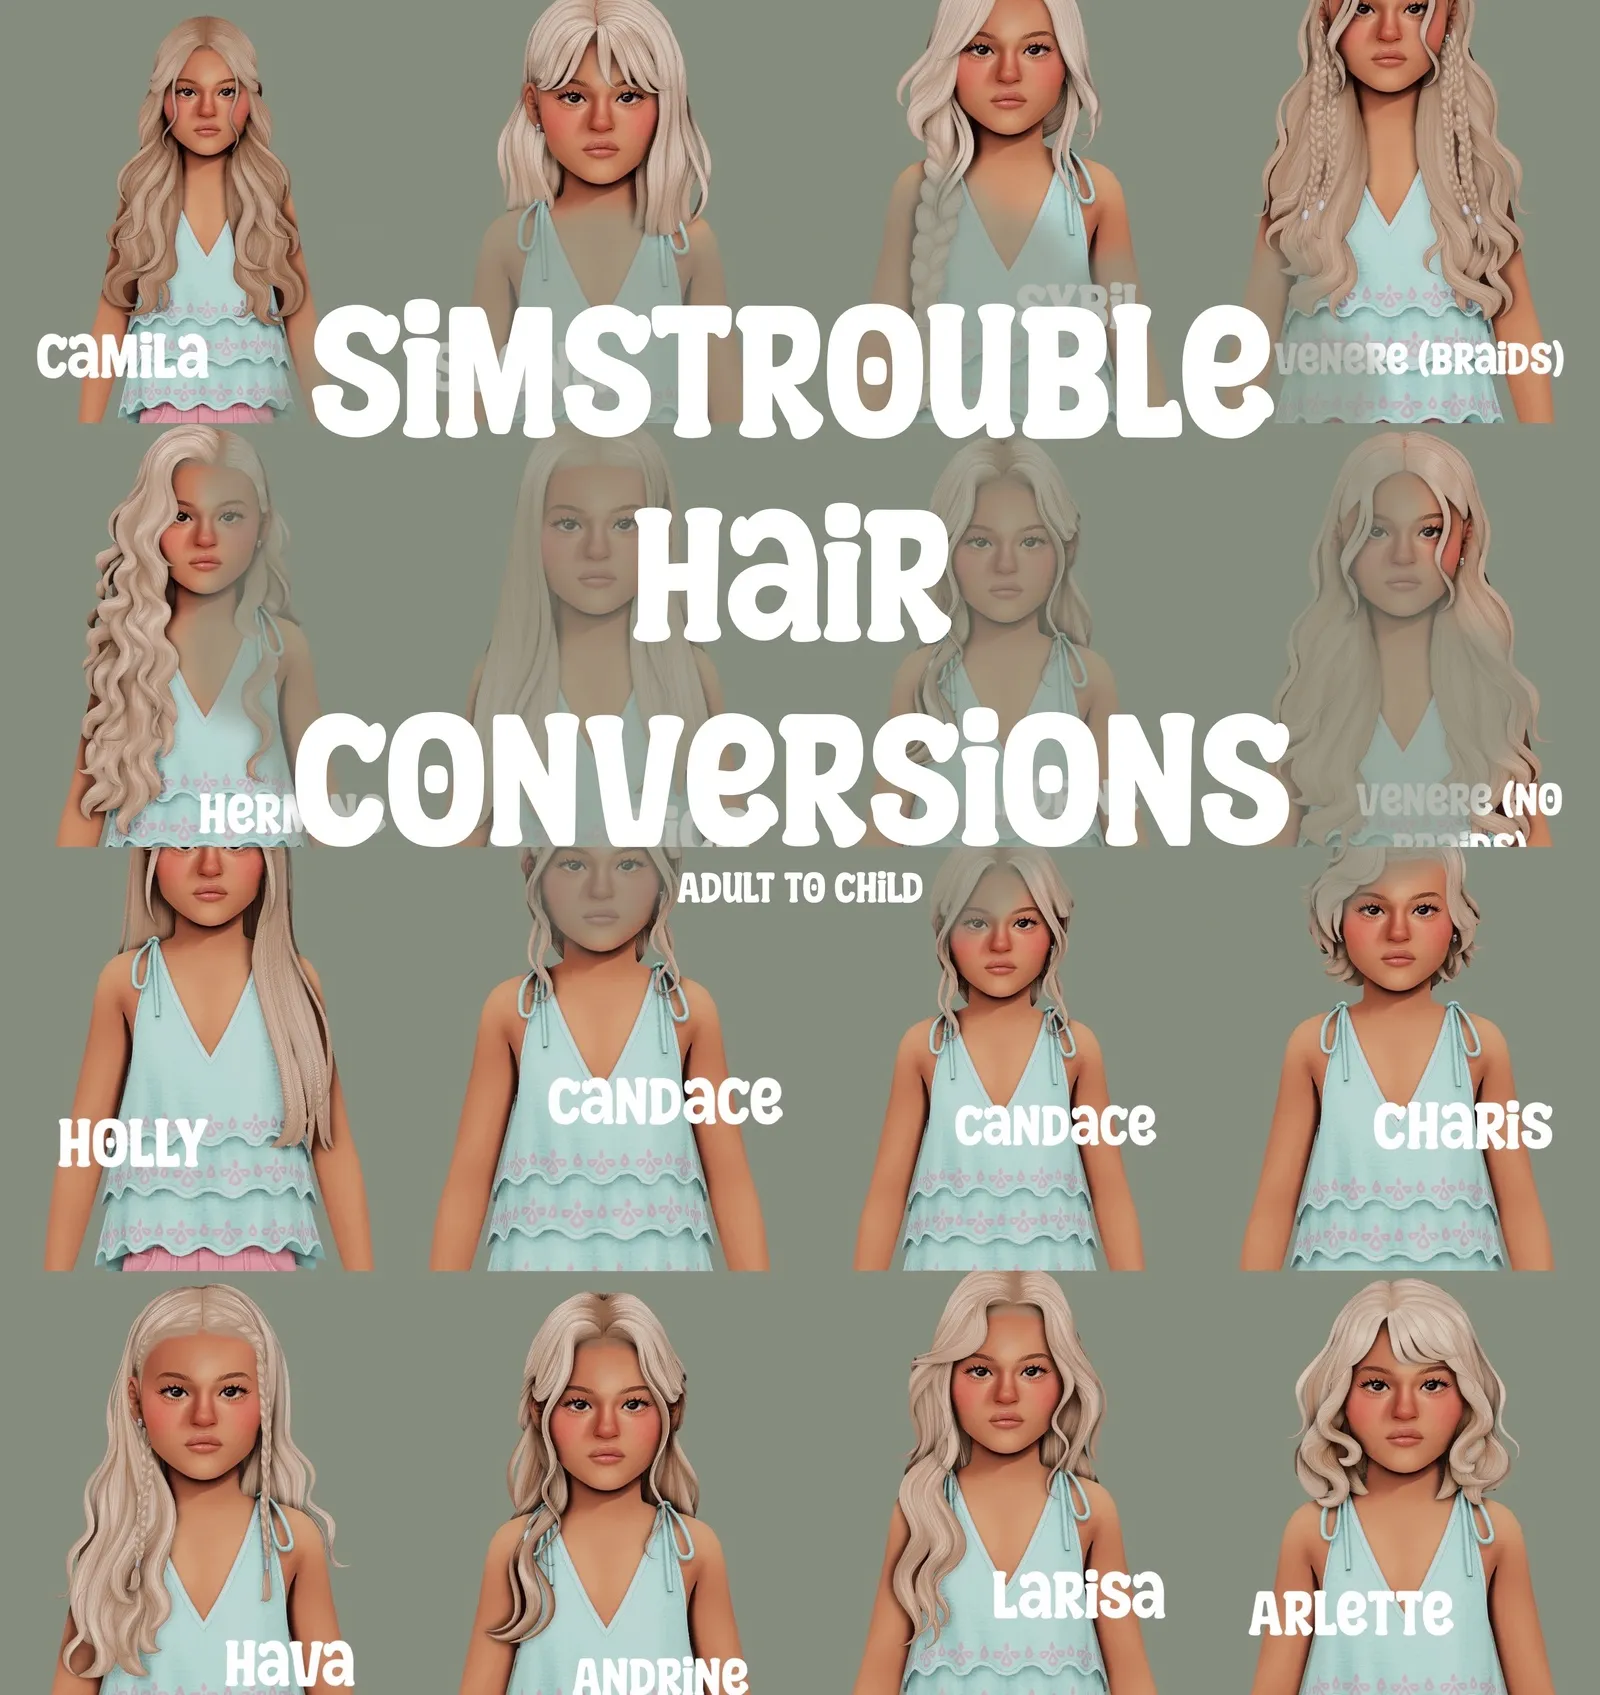 simstrouble hair conversions